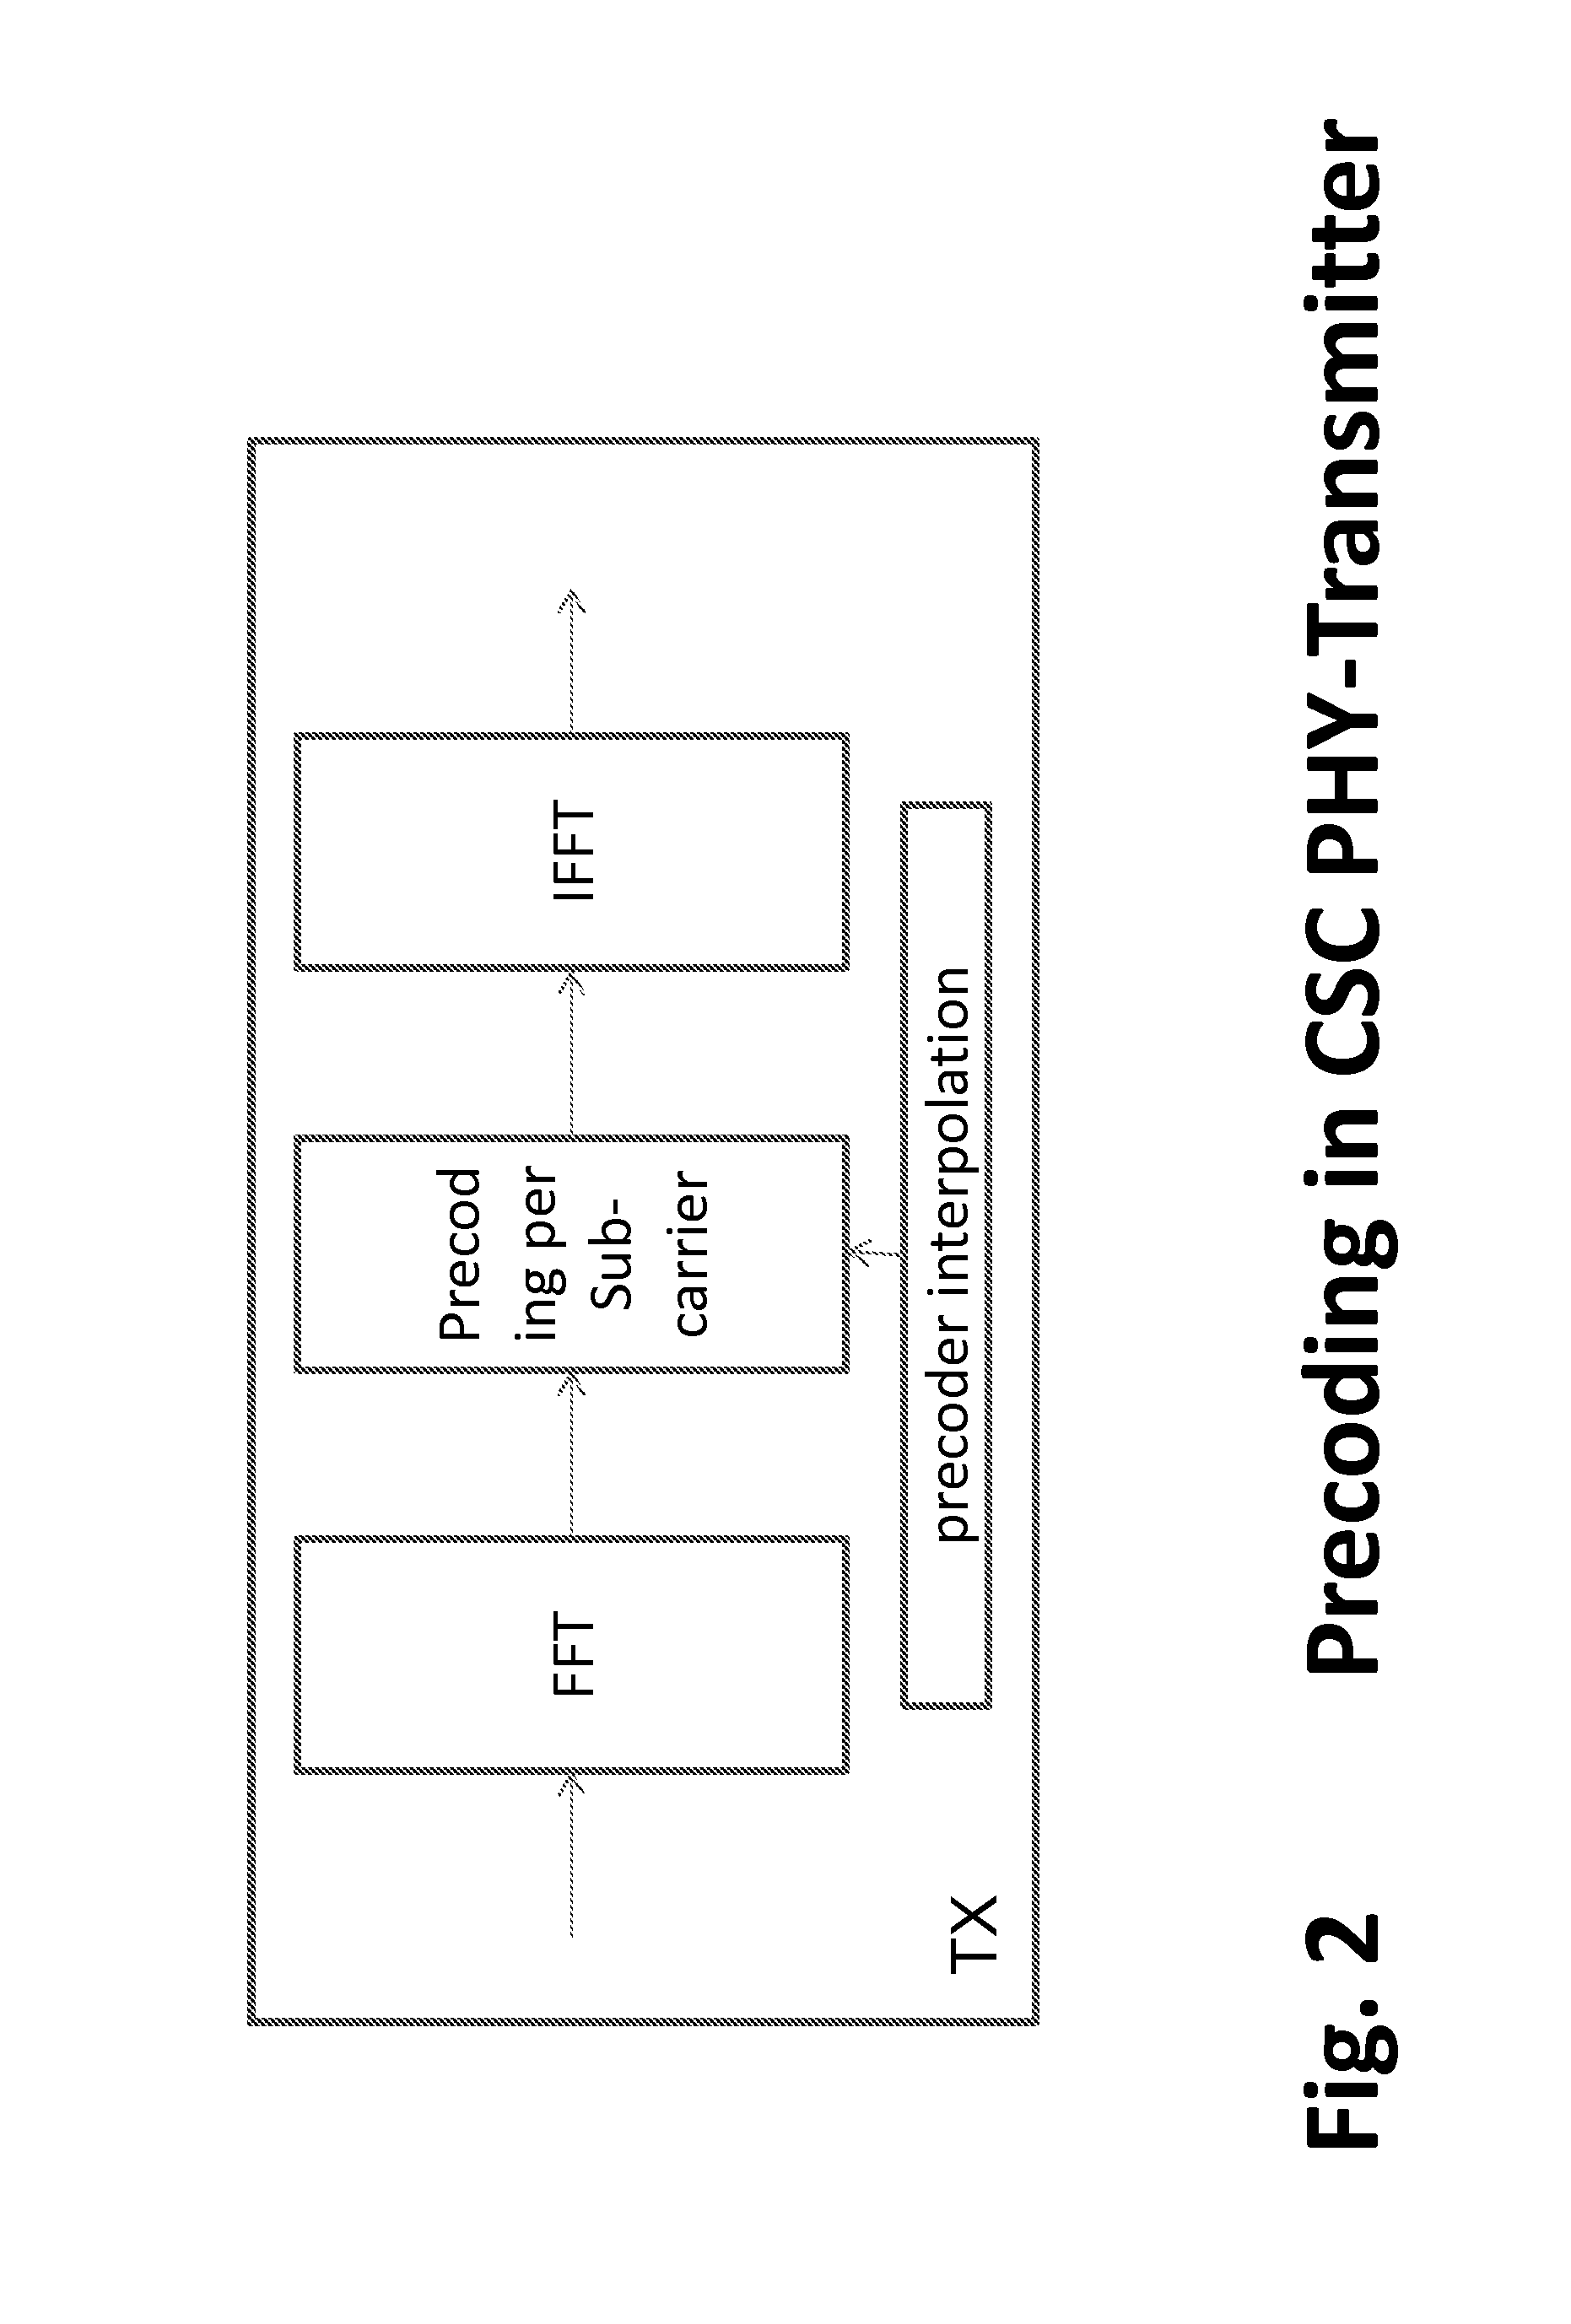 Method and apparatus for precoding in a two transmit antenna closed-loop MIMO fixed wireless backhaul network